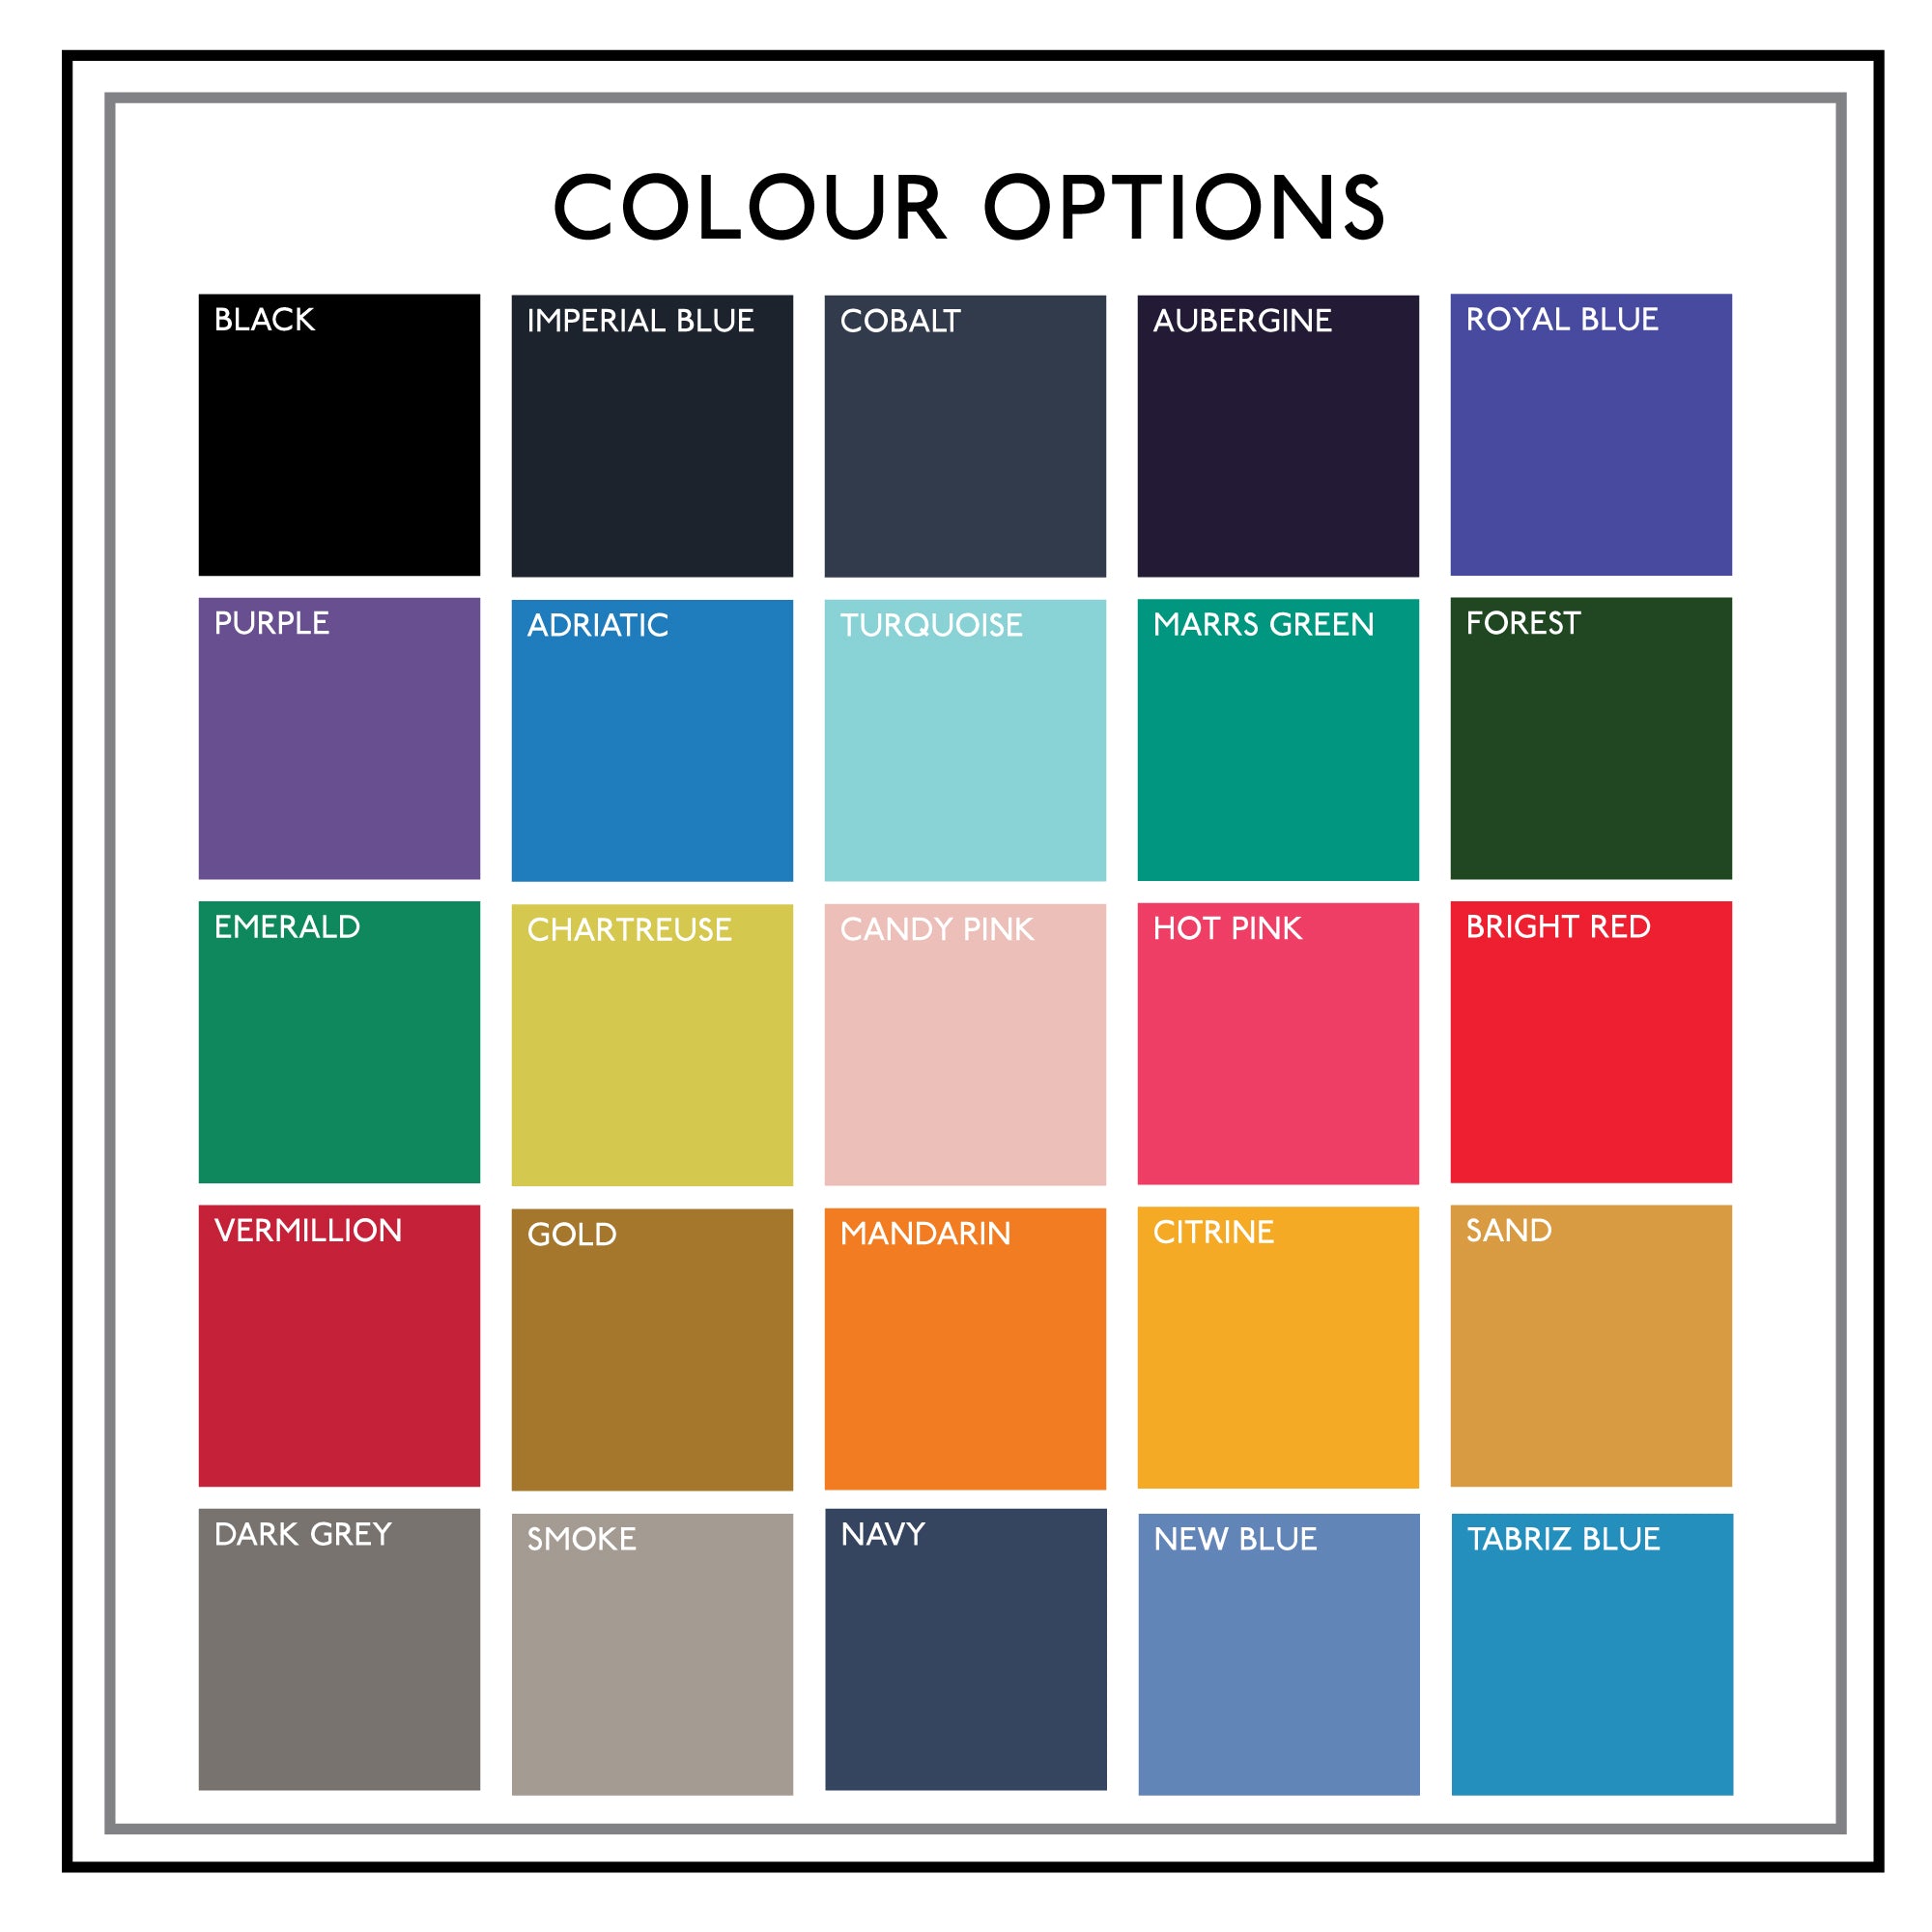 Colour swatch chart showing all available colours